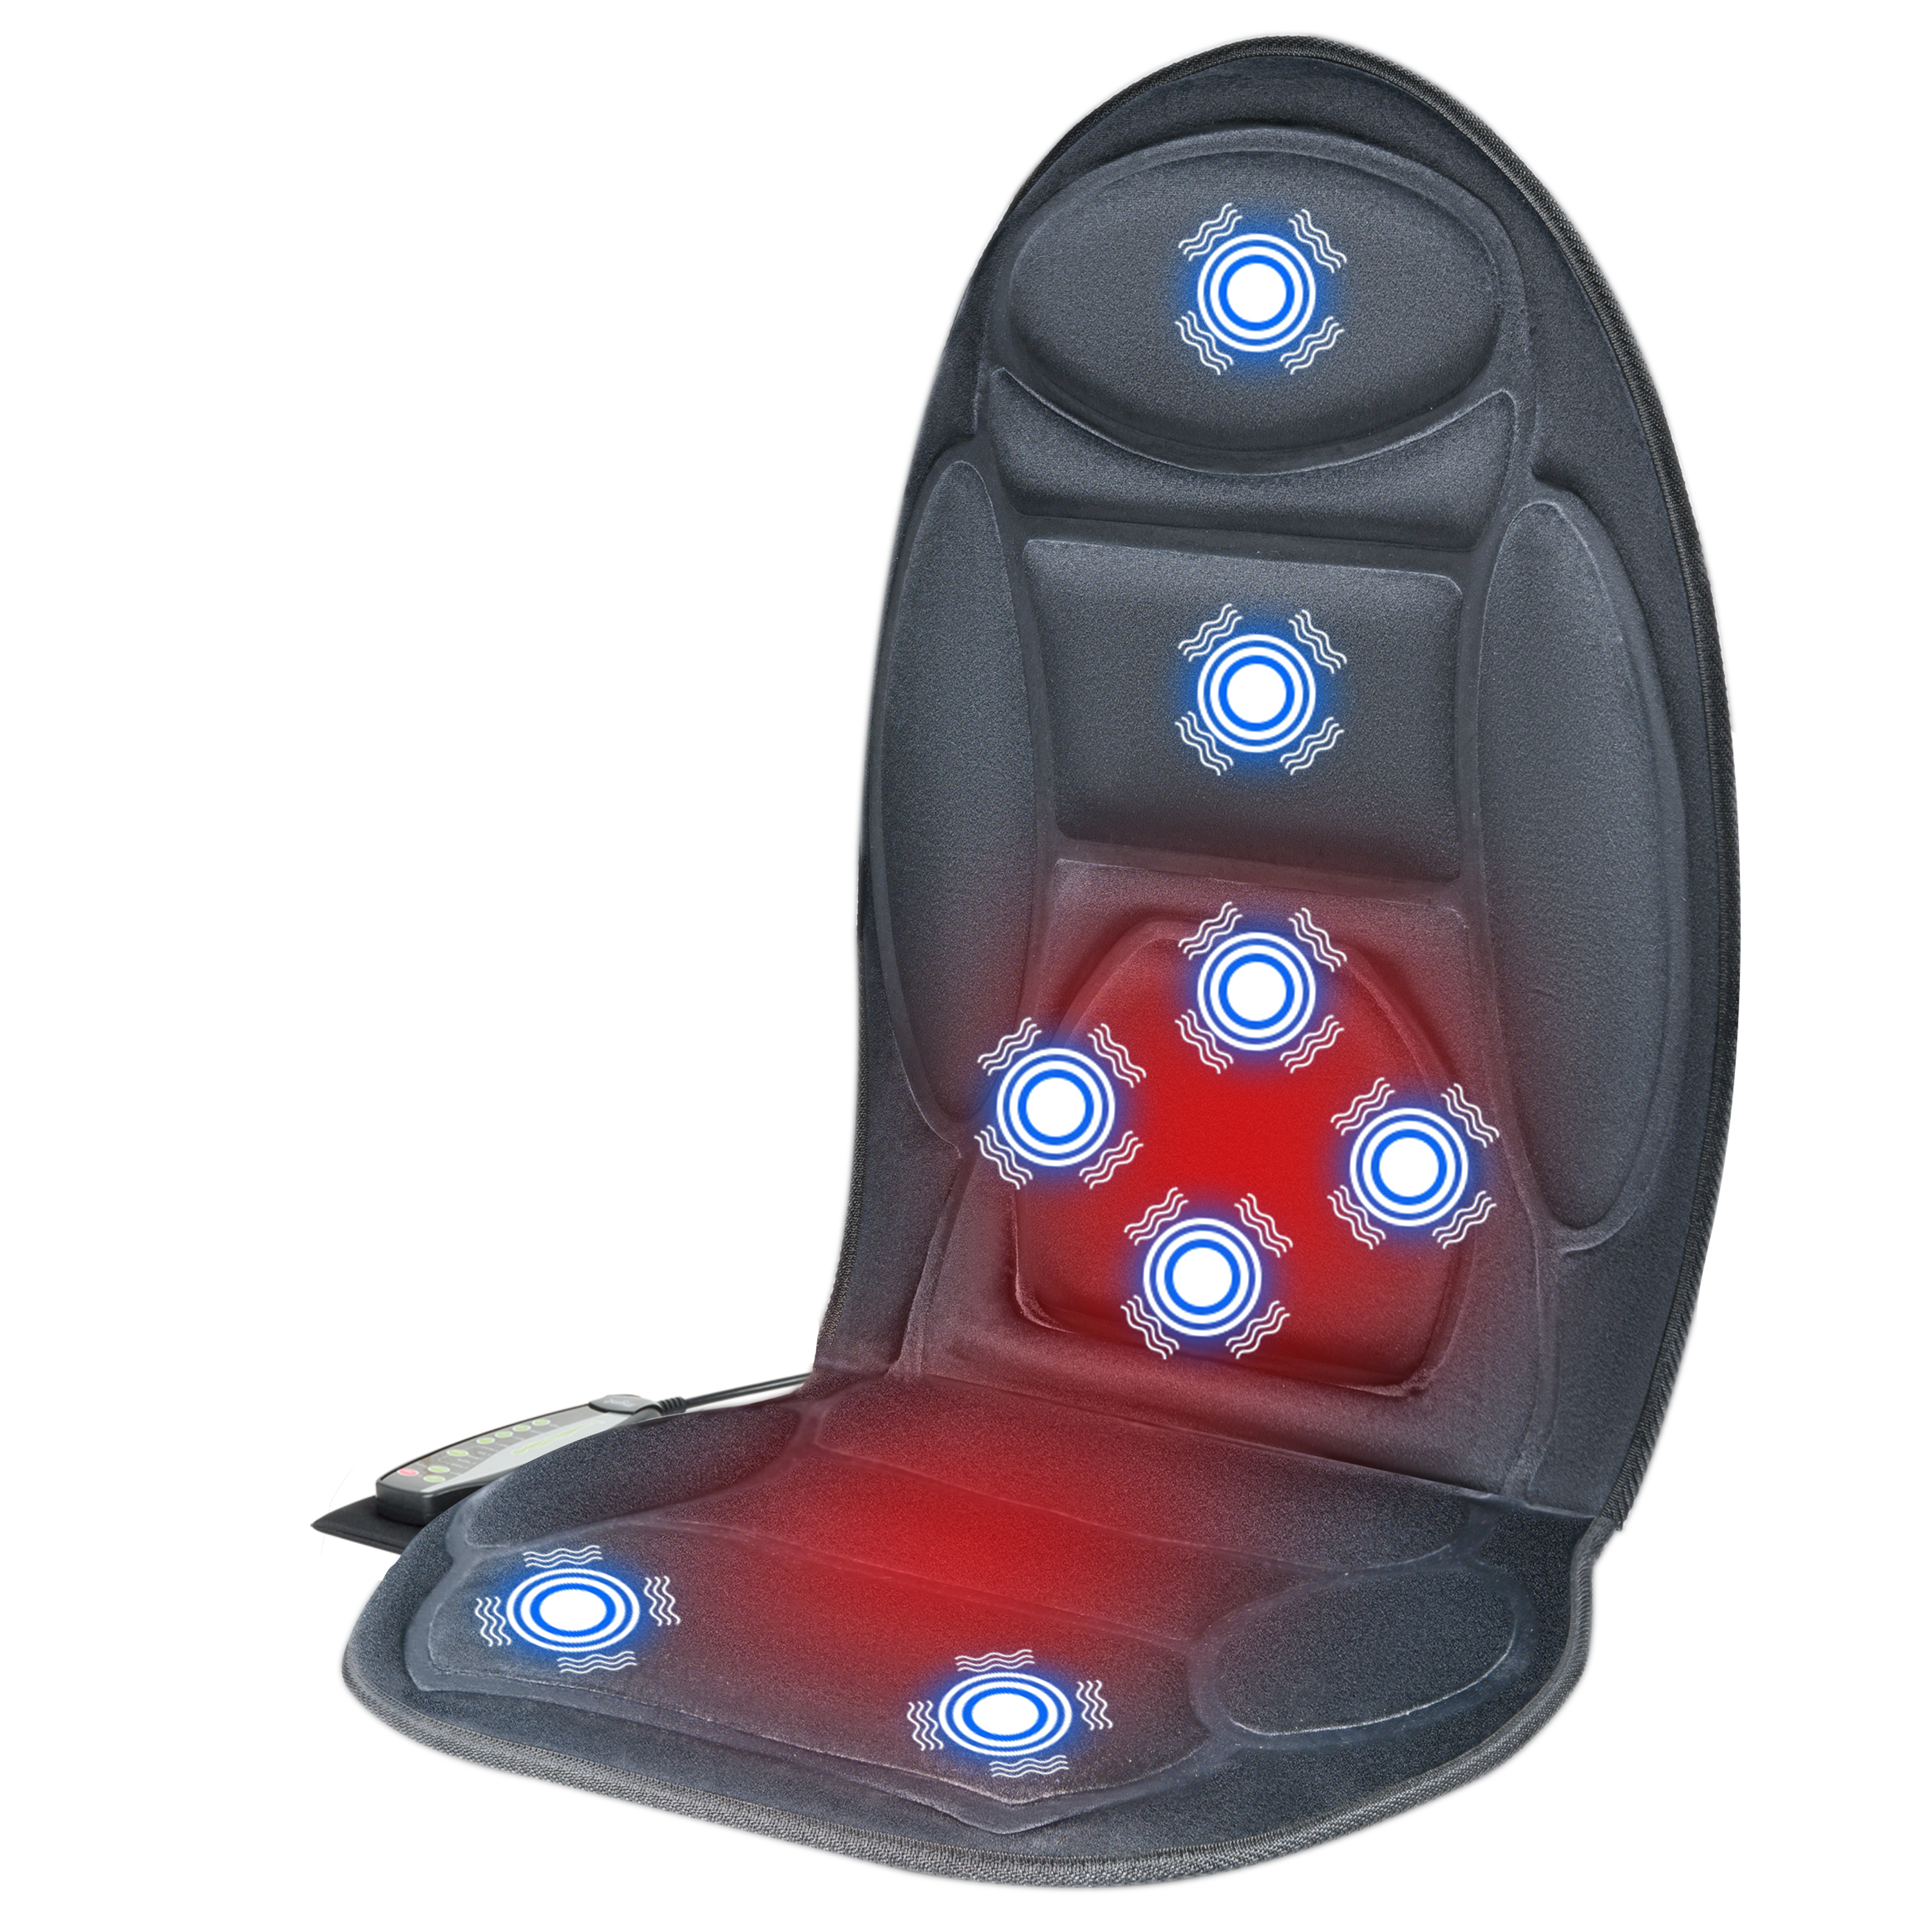 Vibration Back Massager Seat with Heat:Chair Seat Massager with 8 V...